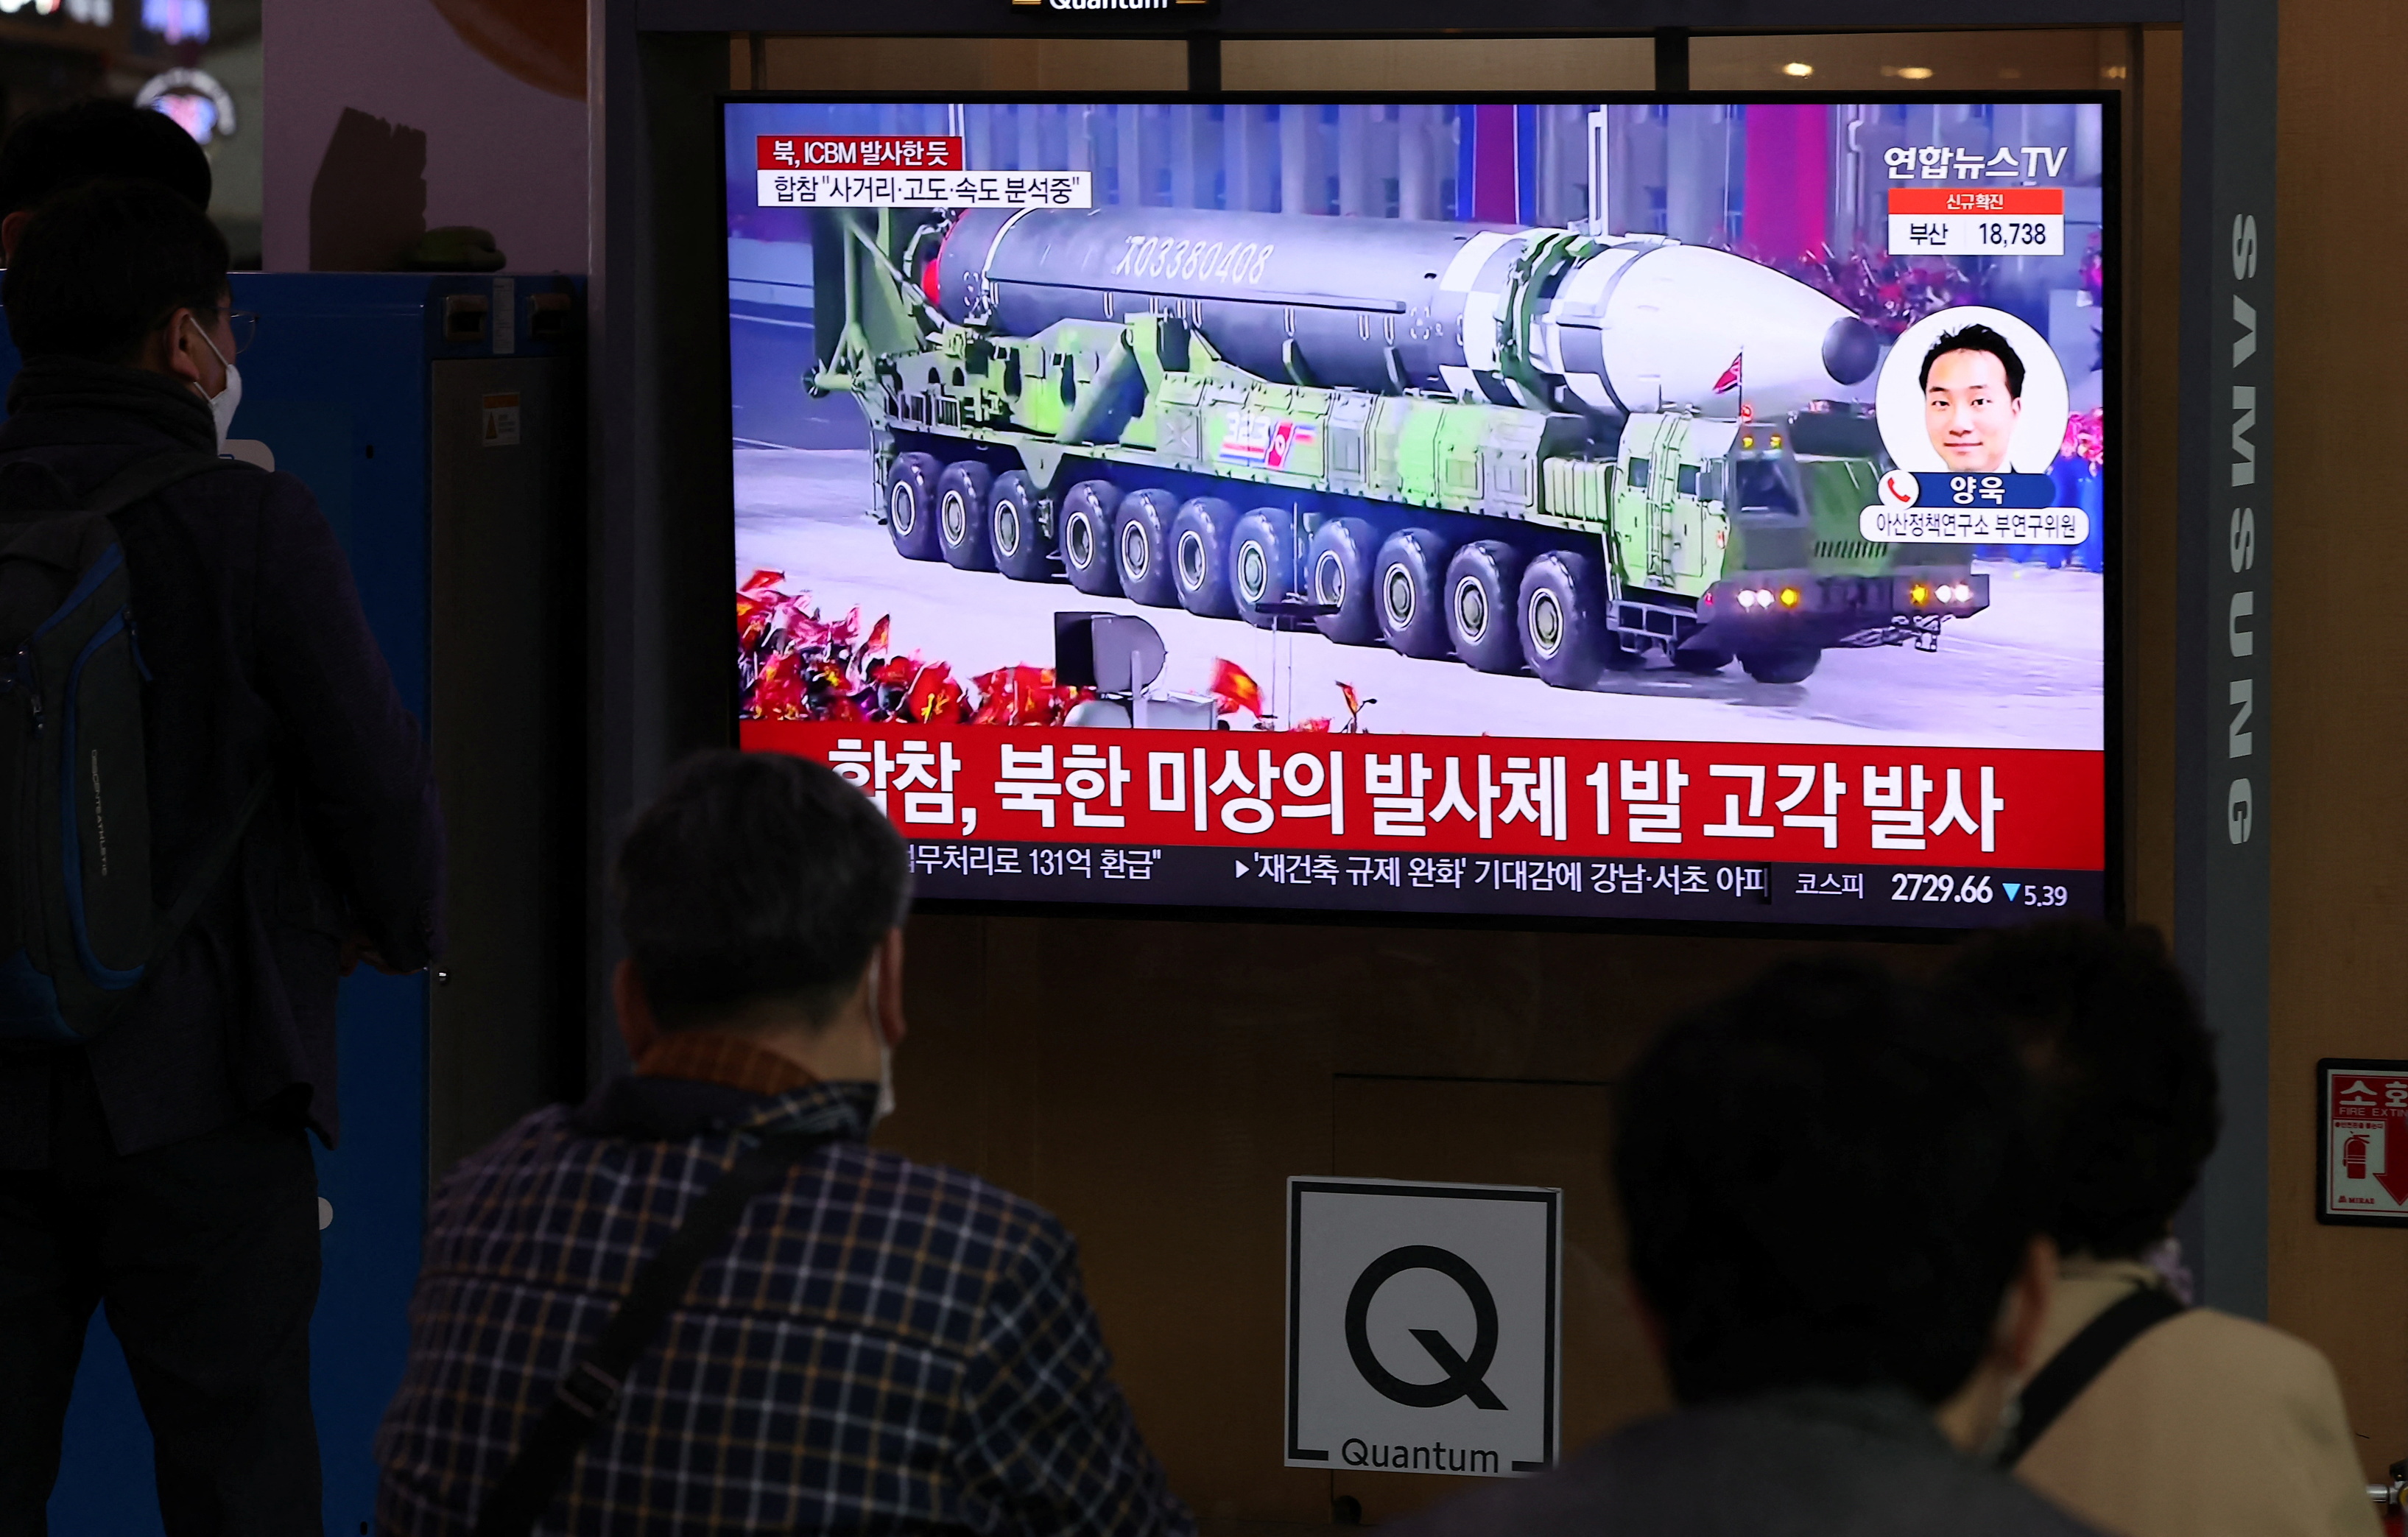 People watch a TV broadcasting a news report on North Korea's intercontinental ballistic missile (ICBM) test, in Seoul